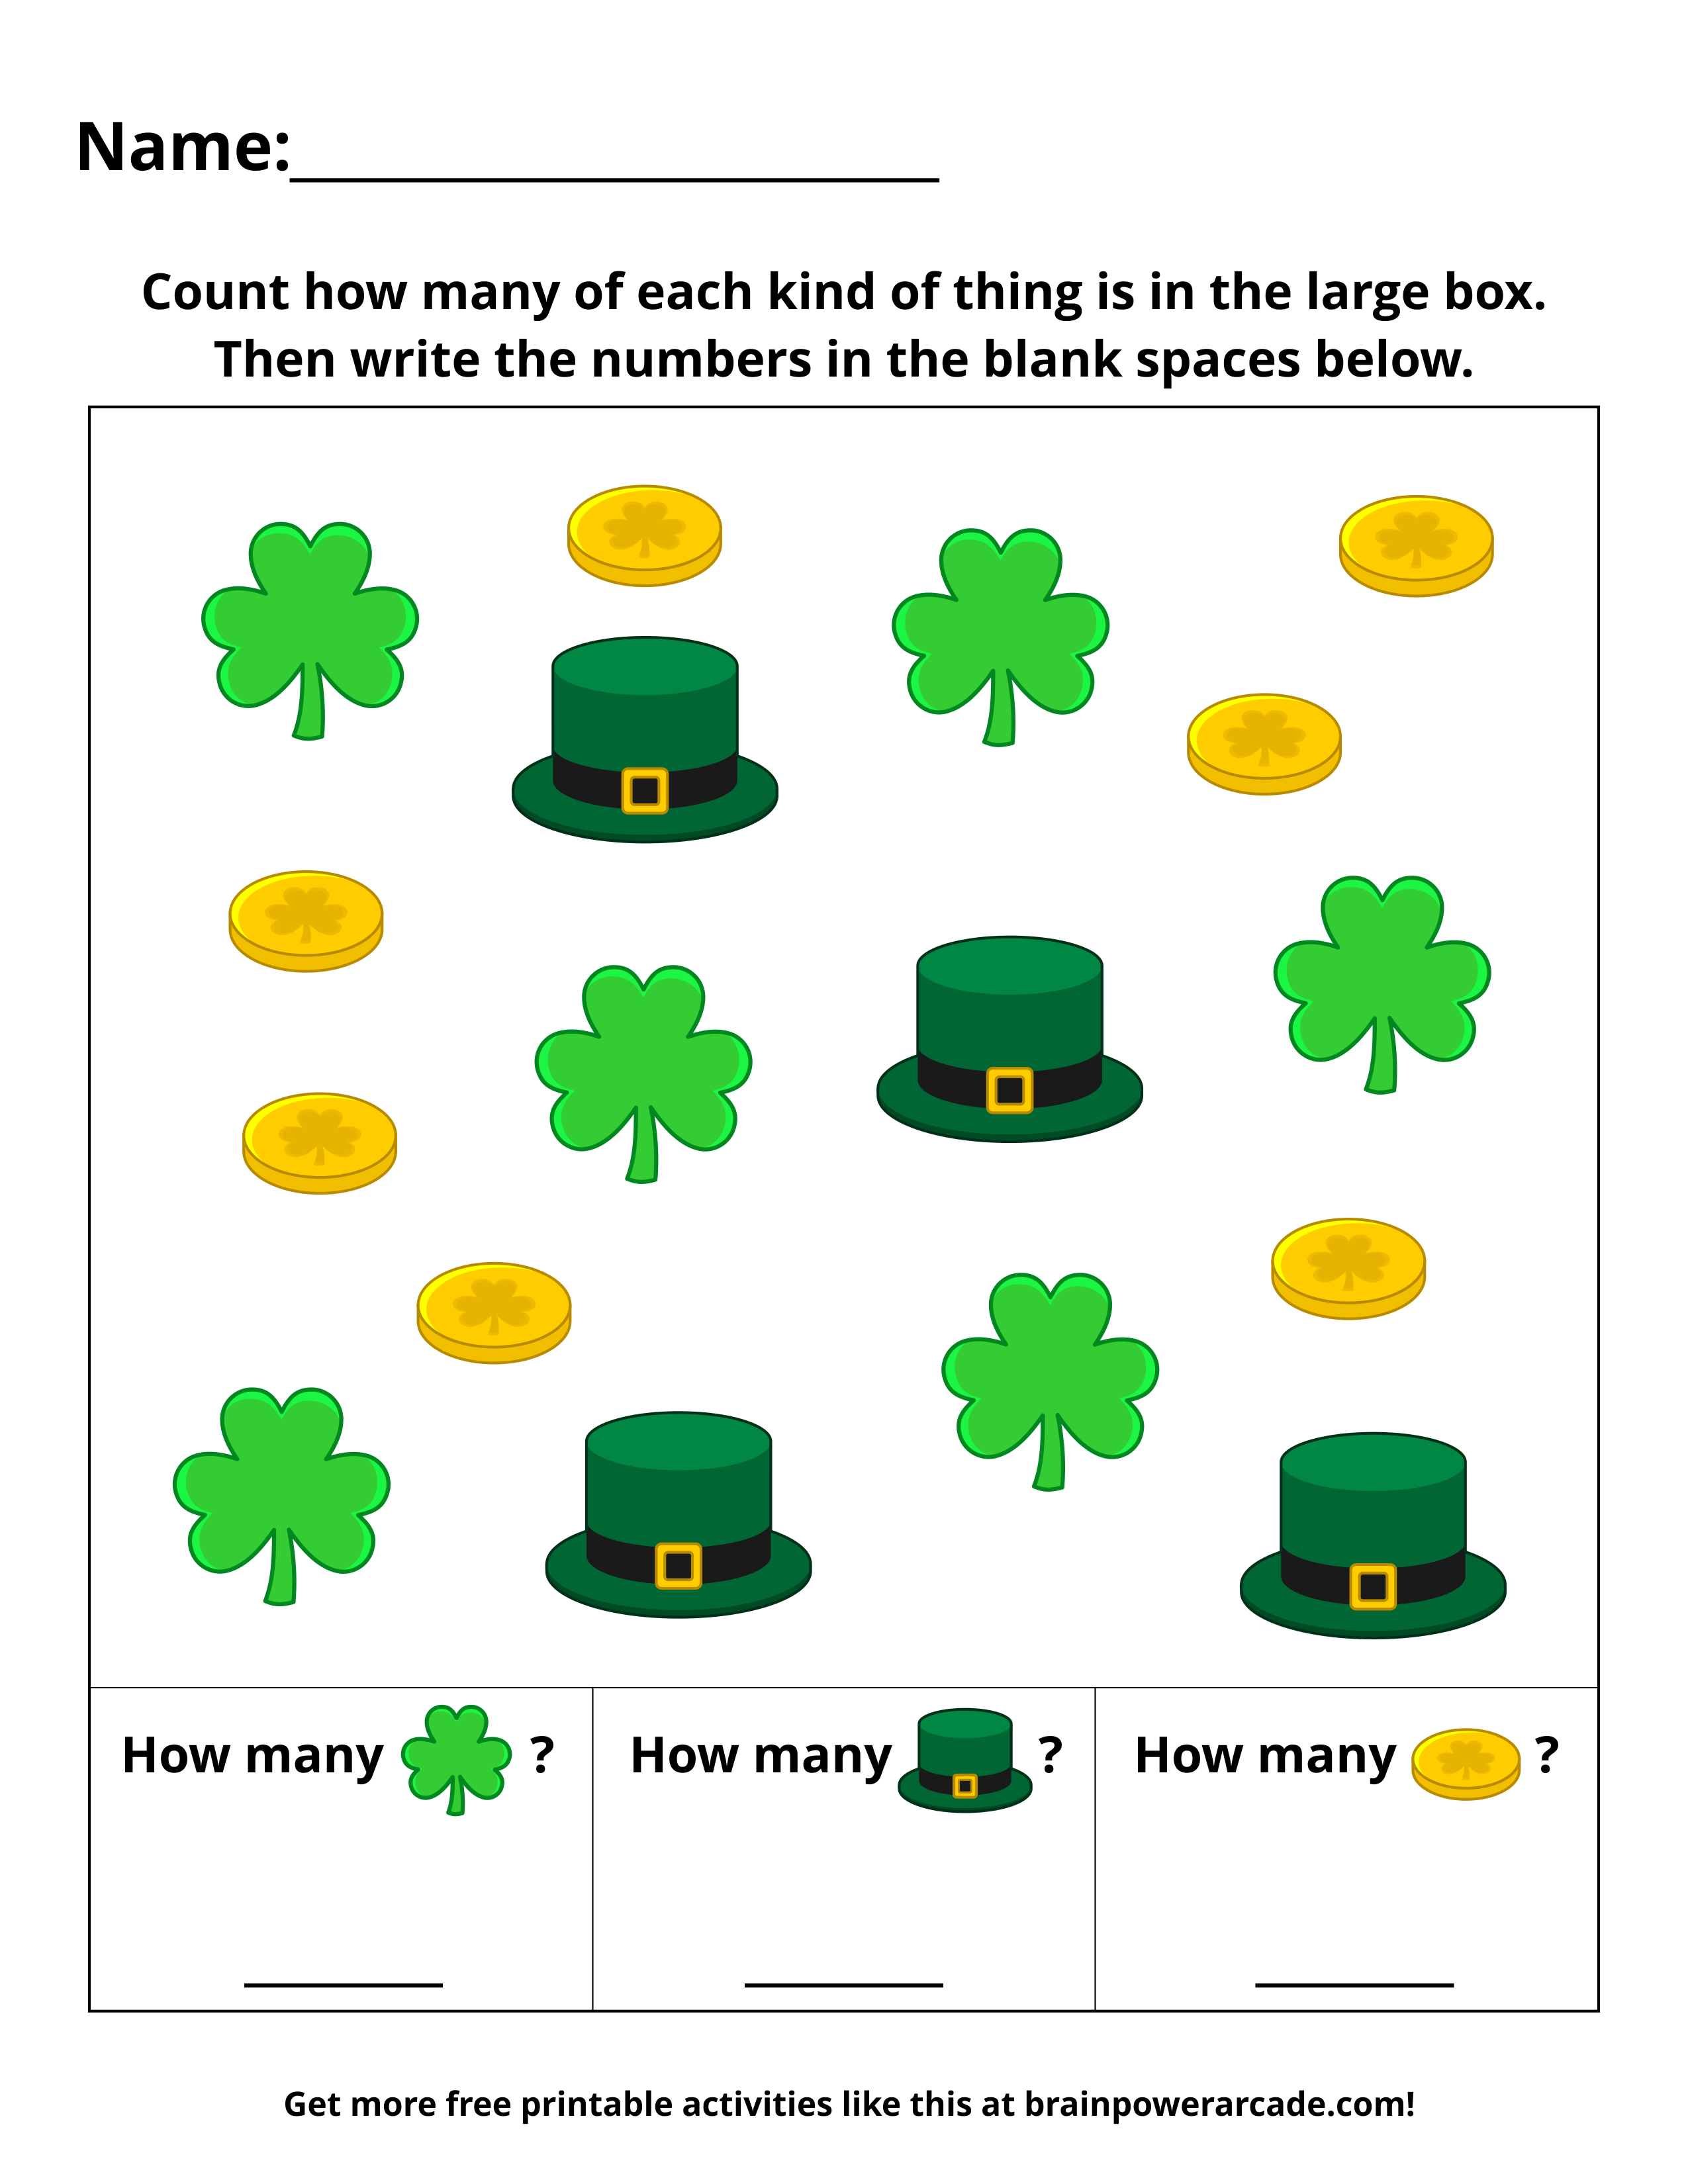 Count Saint Patrick's Day Items